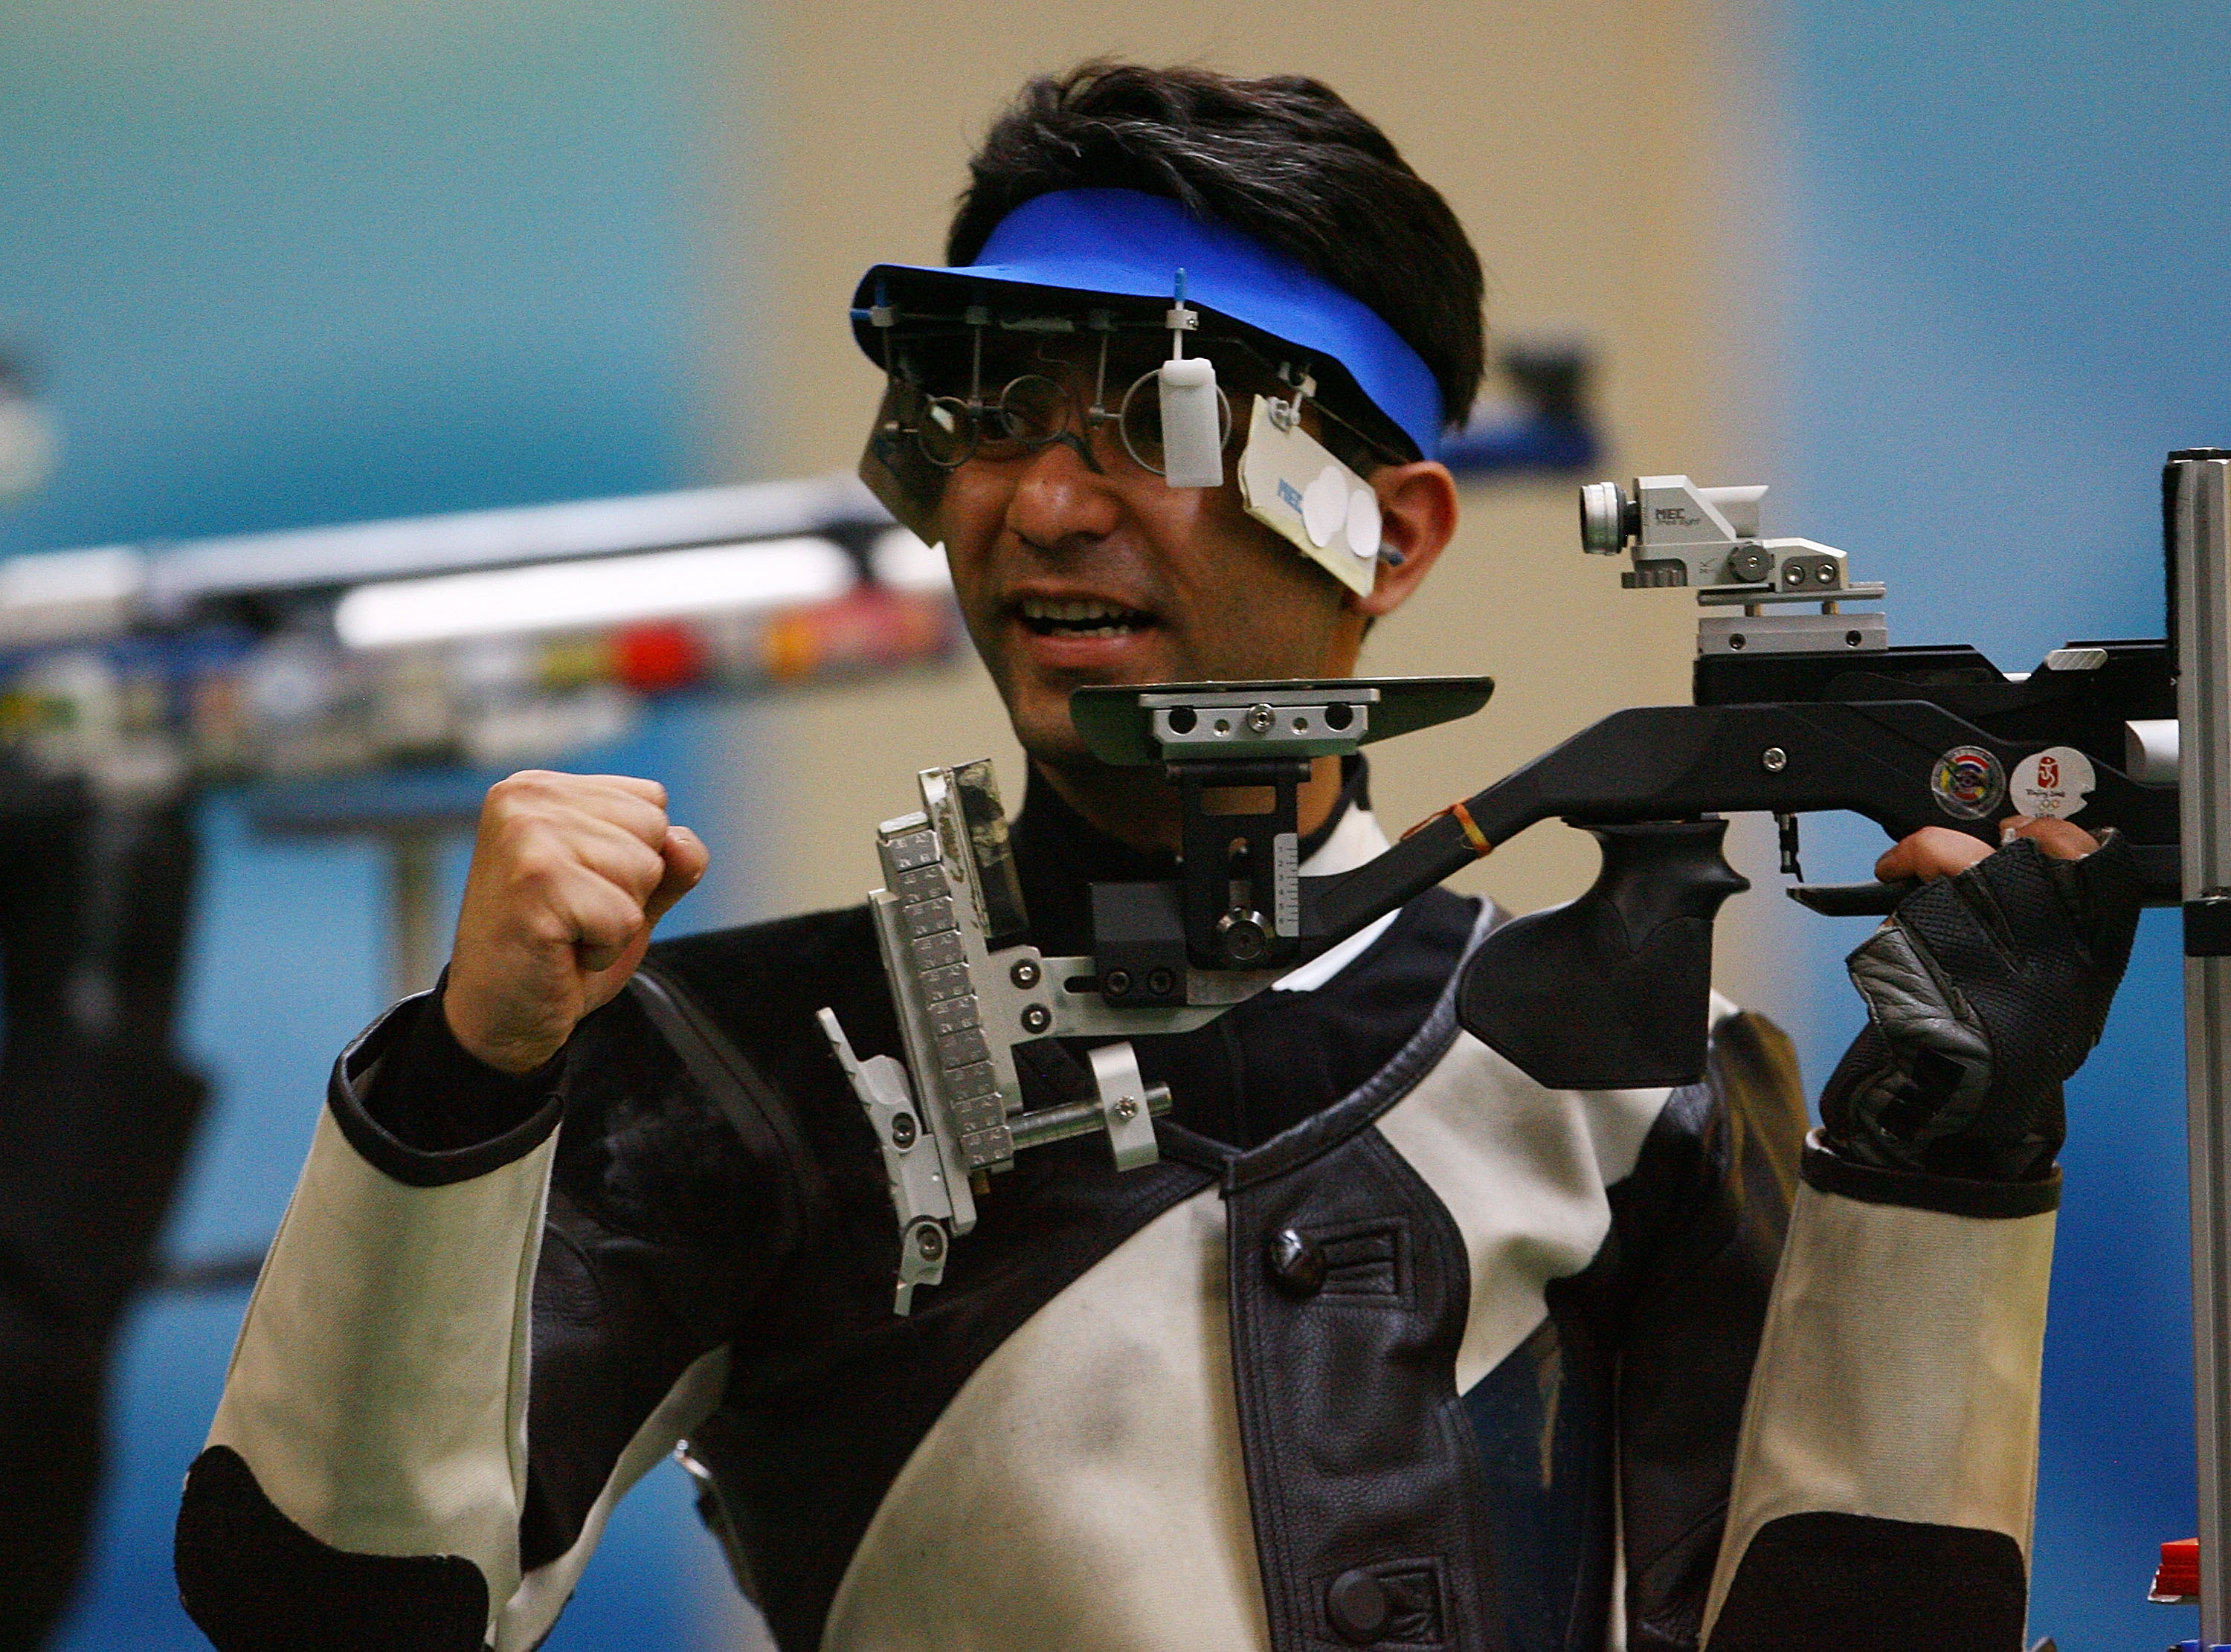 Youngsters coming through the ranks is a good sign, says Abhinav Bindra